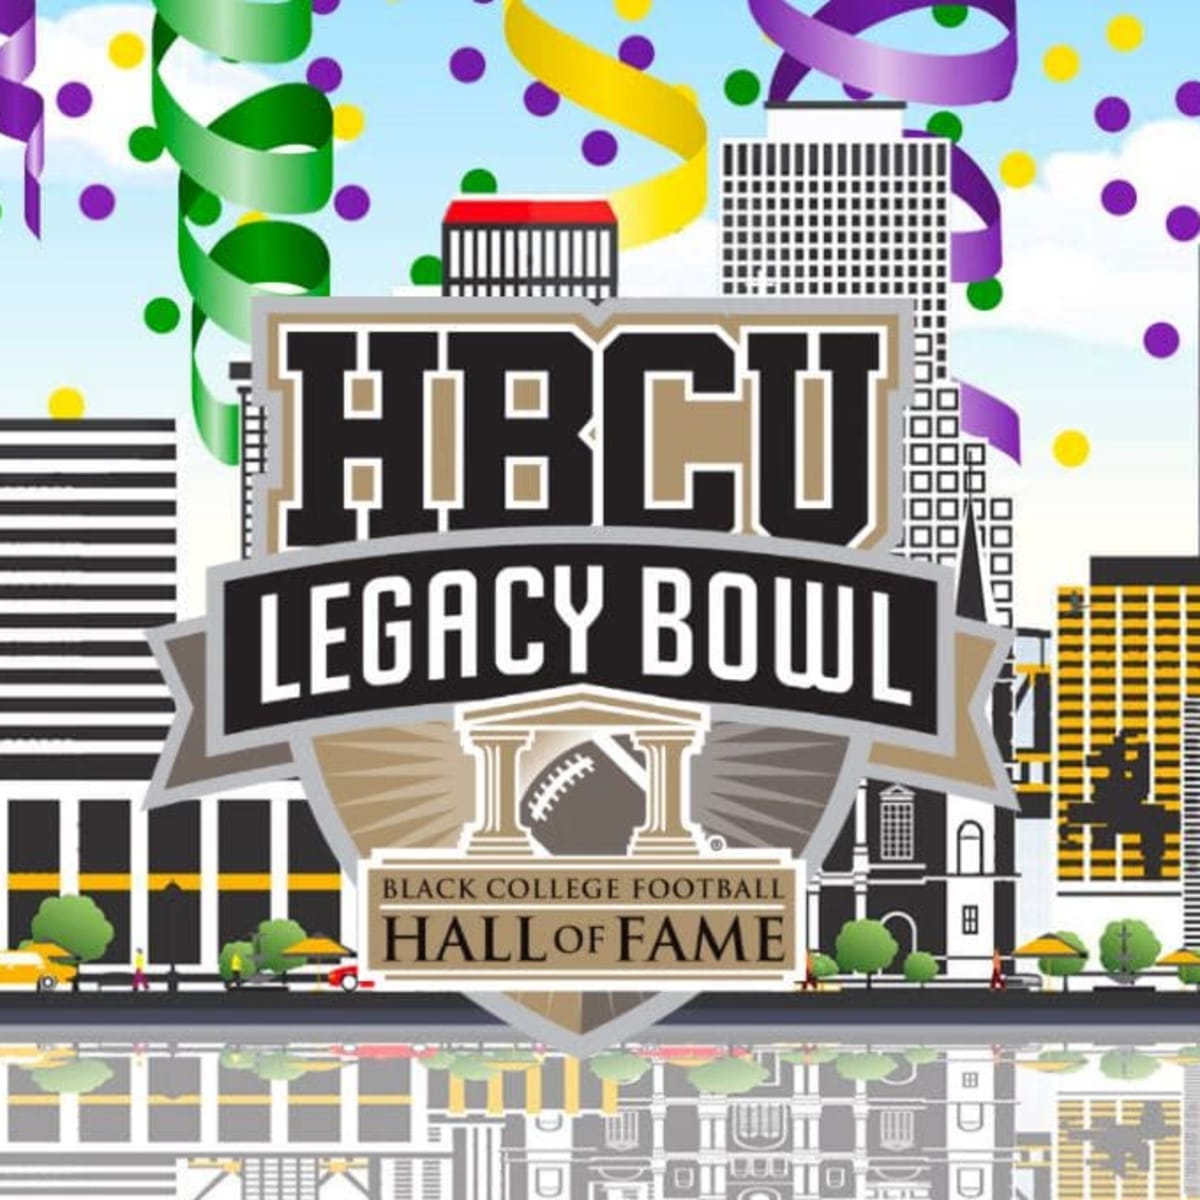 HBCUs and the NFL Draft: The Data and the Story - UPD Consulting